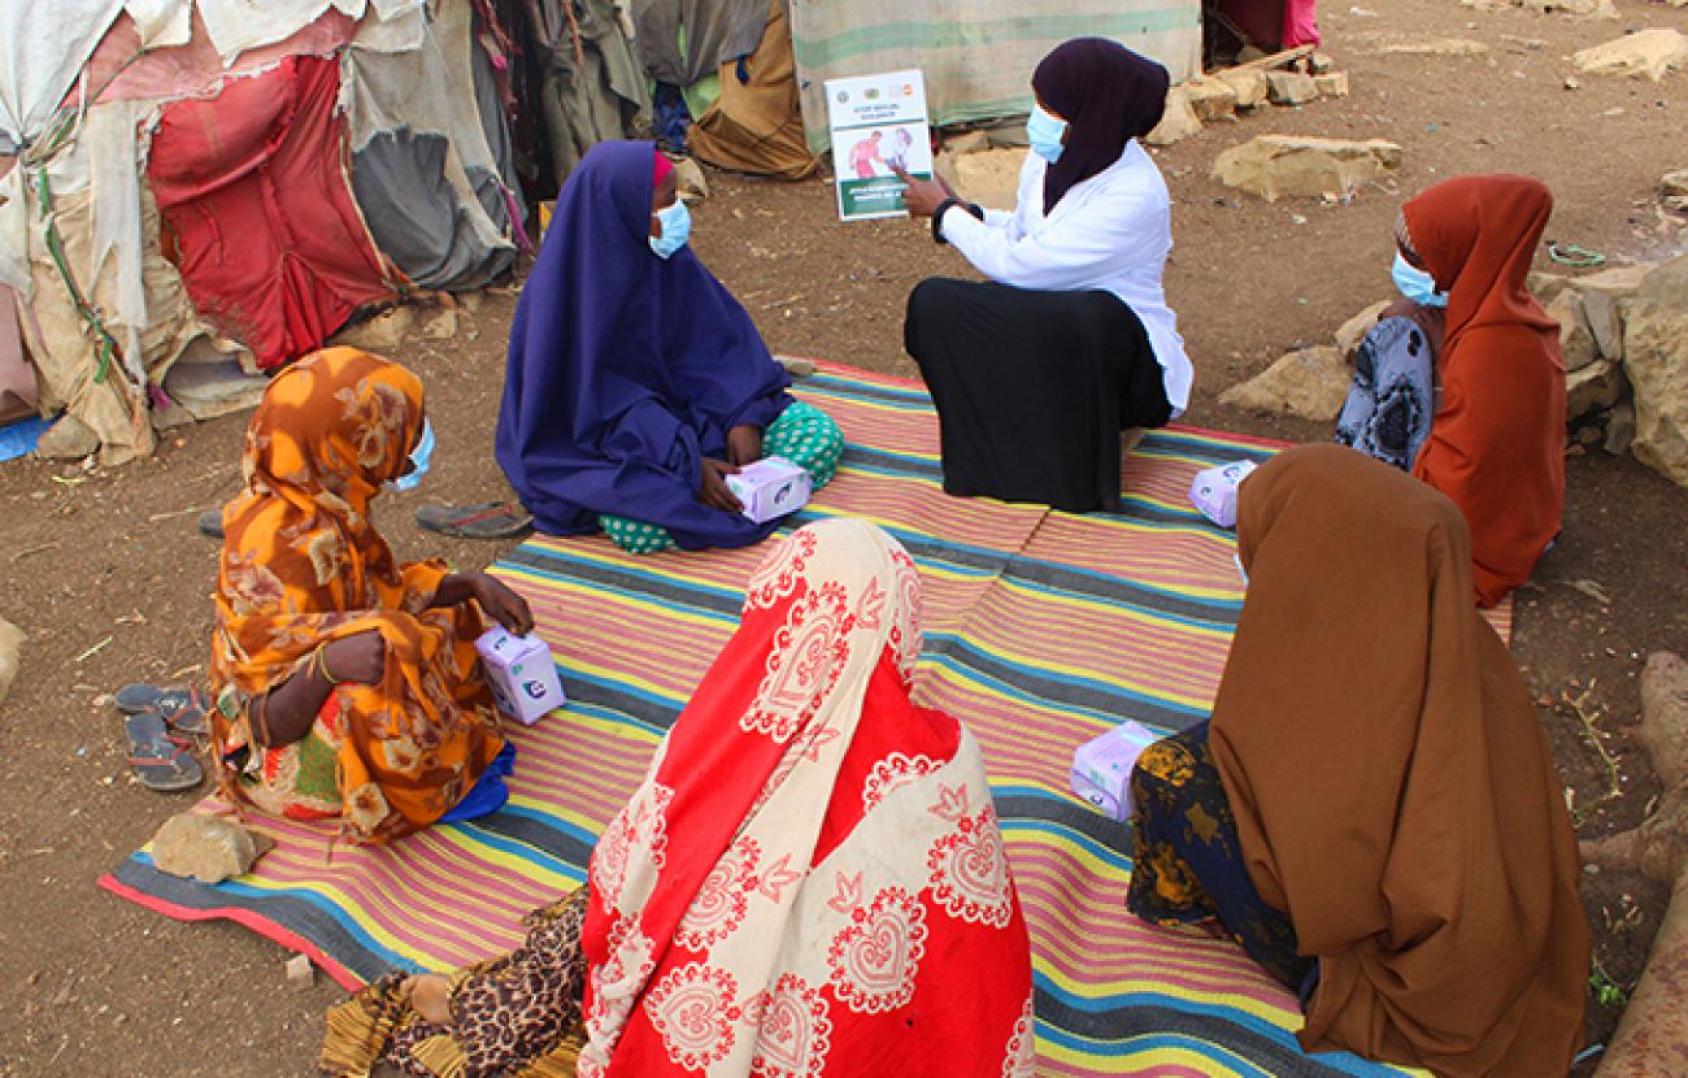 A group of women sit in a circle looking at an informational pamphlet.